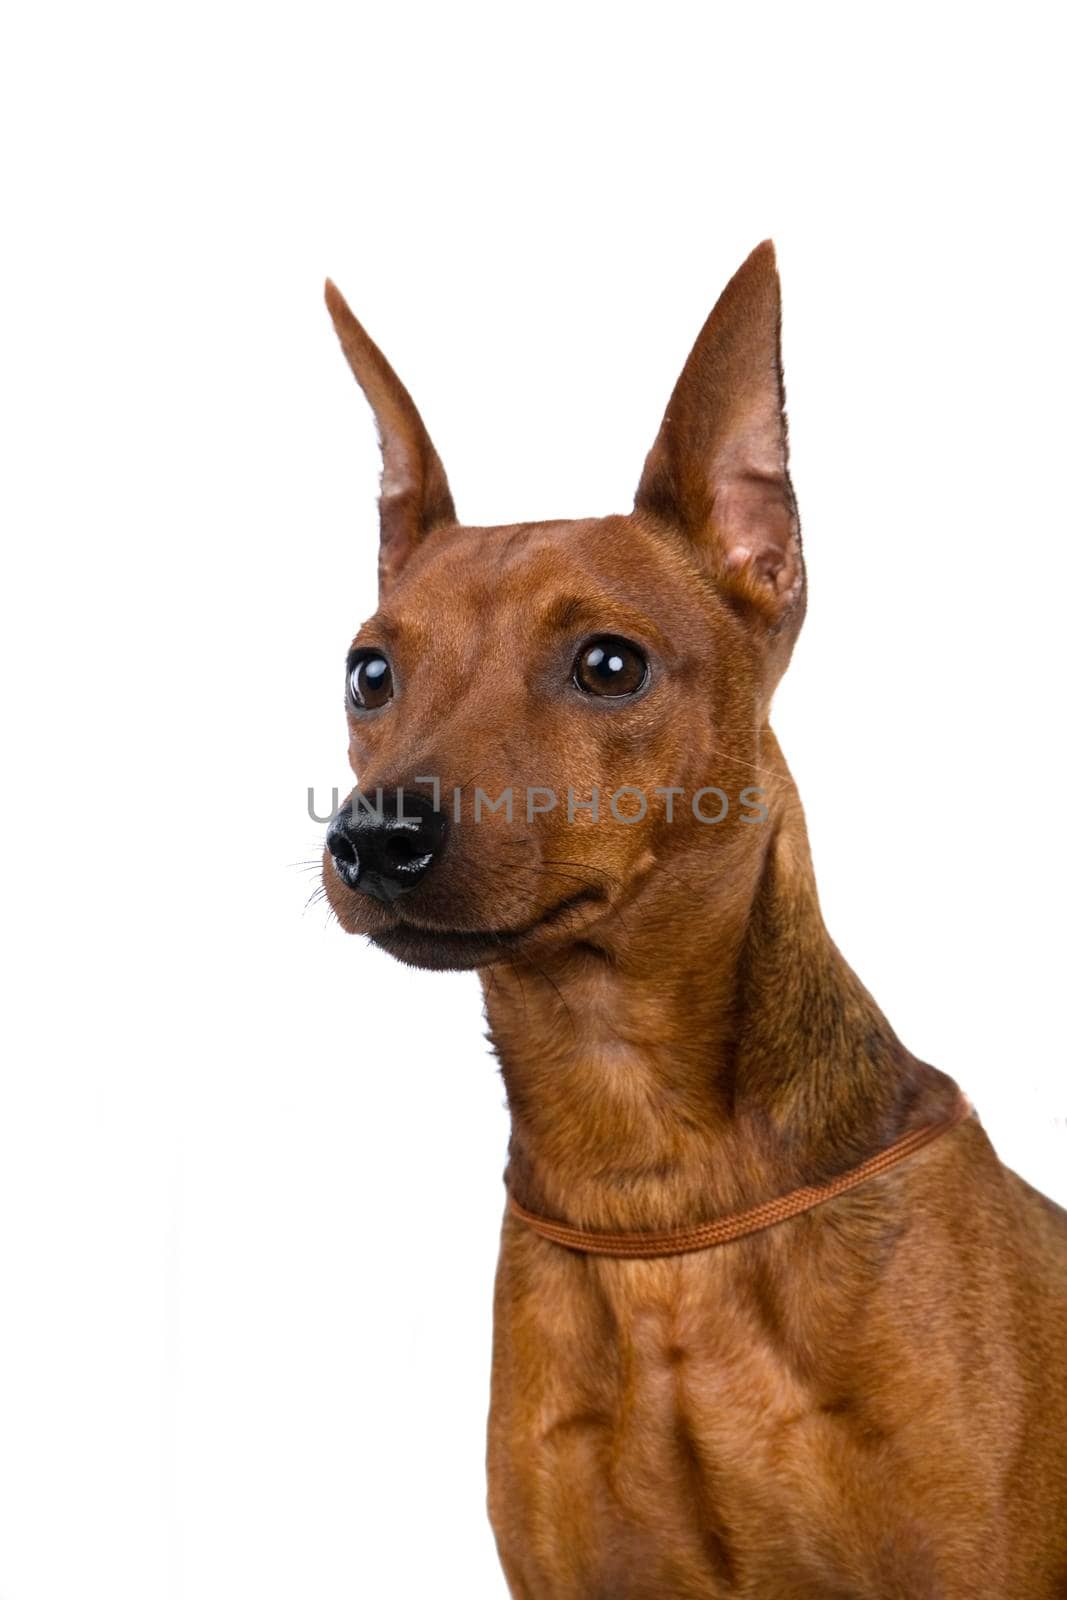 Dwarfish pinscher costs on white by RosaJay